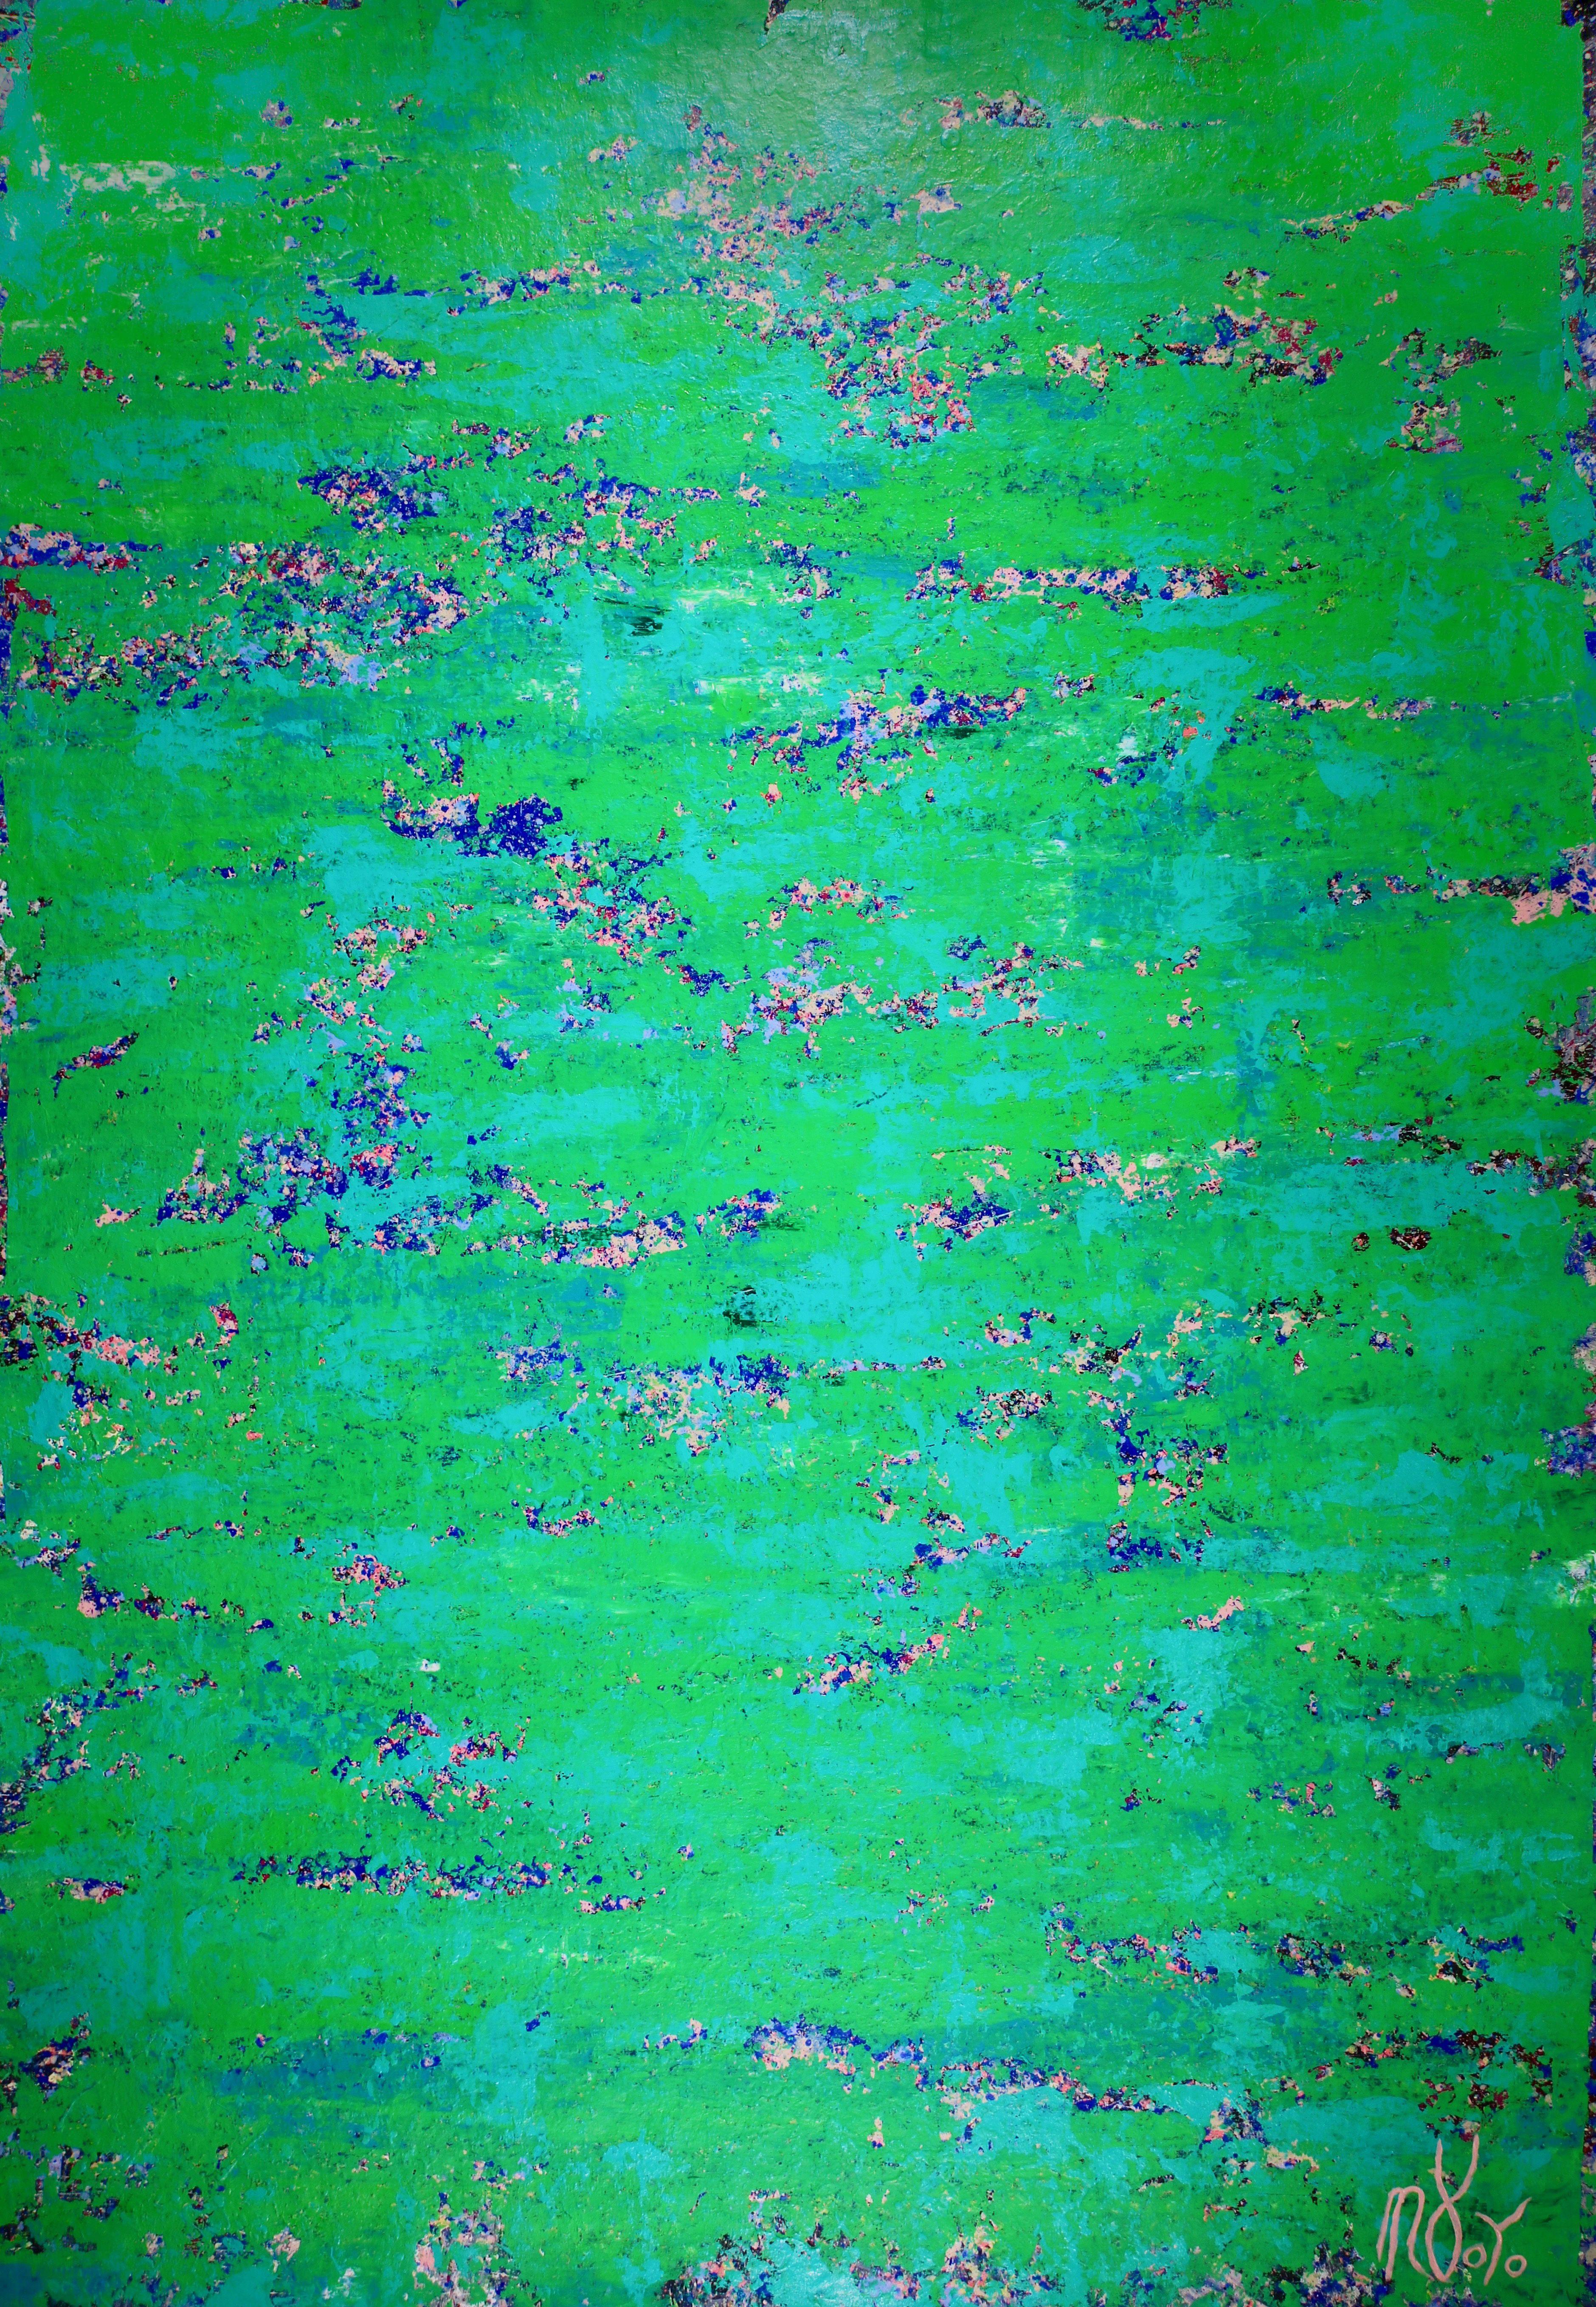 IMPACTFUL EMERALD GREEN COLORFIELD!     XXL Contemplative, bold, NATURE inspired by the incredible variety of the gemstone it is named after - Statement Artwork. Organic gestural color field painting with many shades of green, teal and subtle